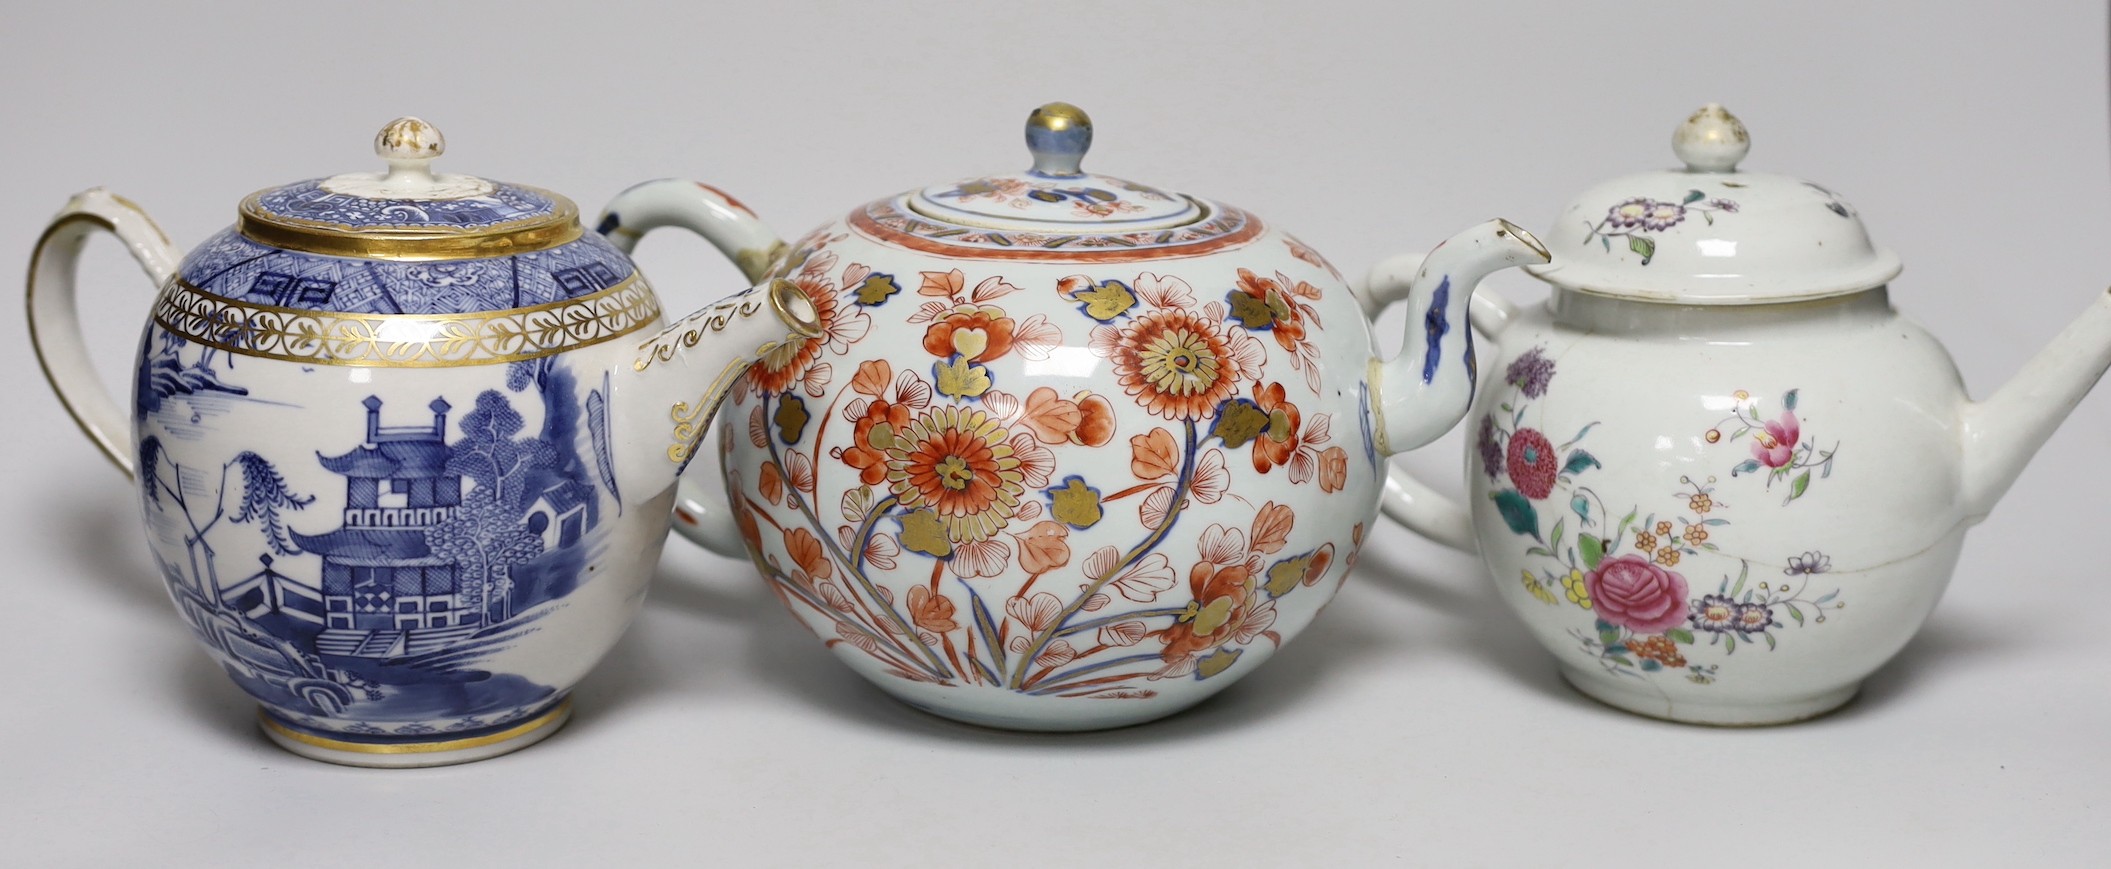 Four 18th century Chinese Export porcelain teapots. Tallest 15cm - Image 3 of 7